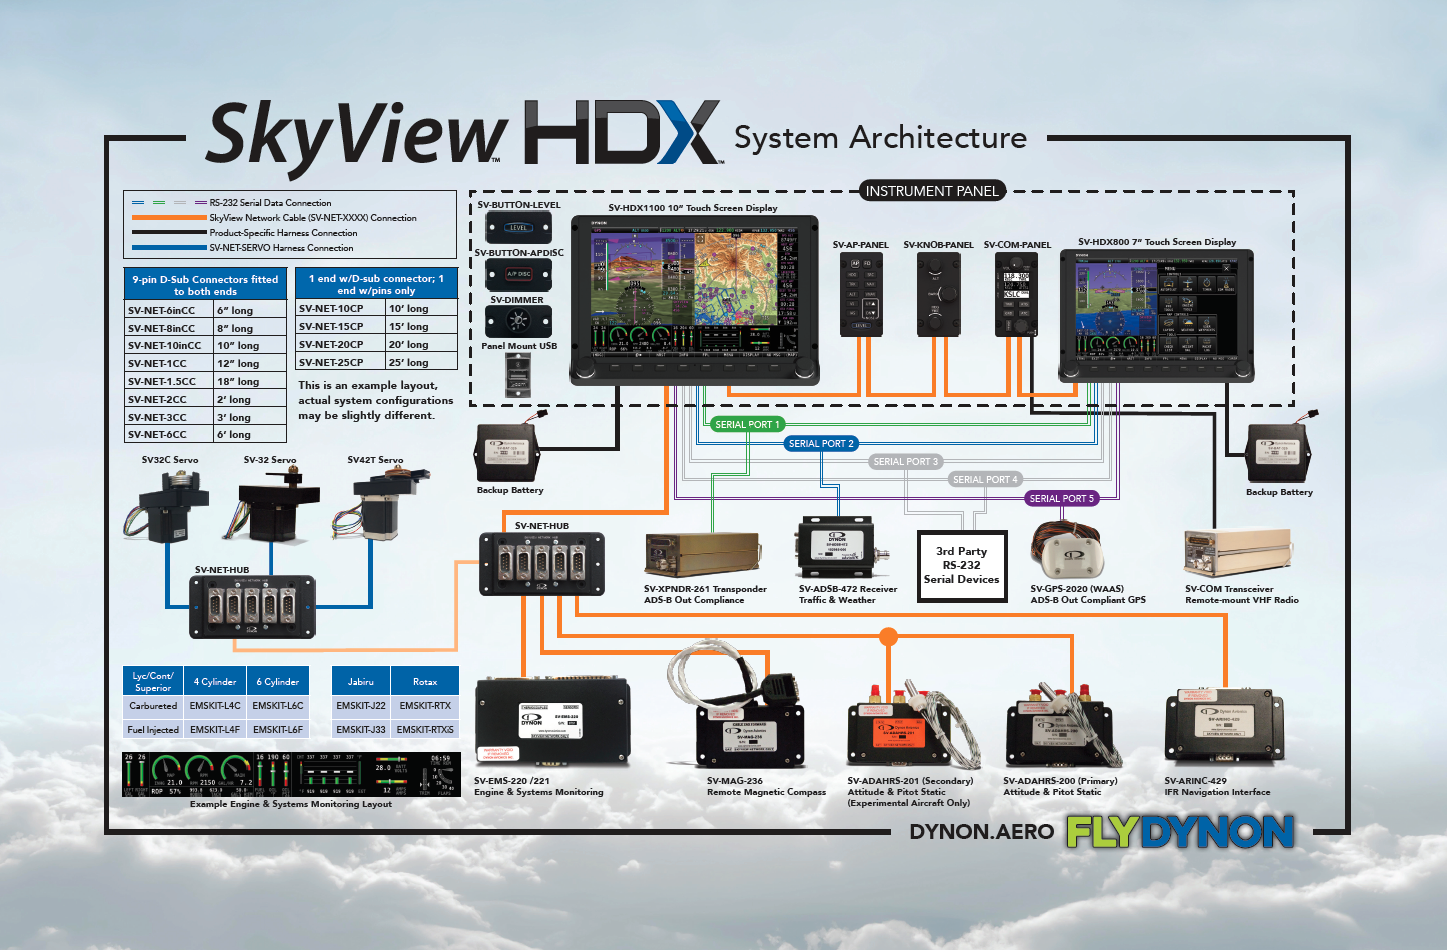 View or Download The Dynon SkyView System Architecture